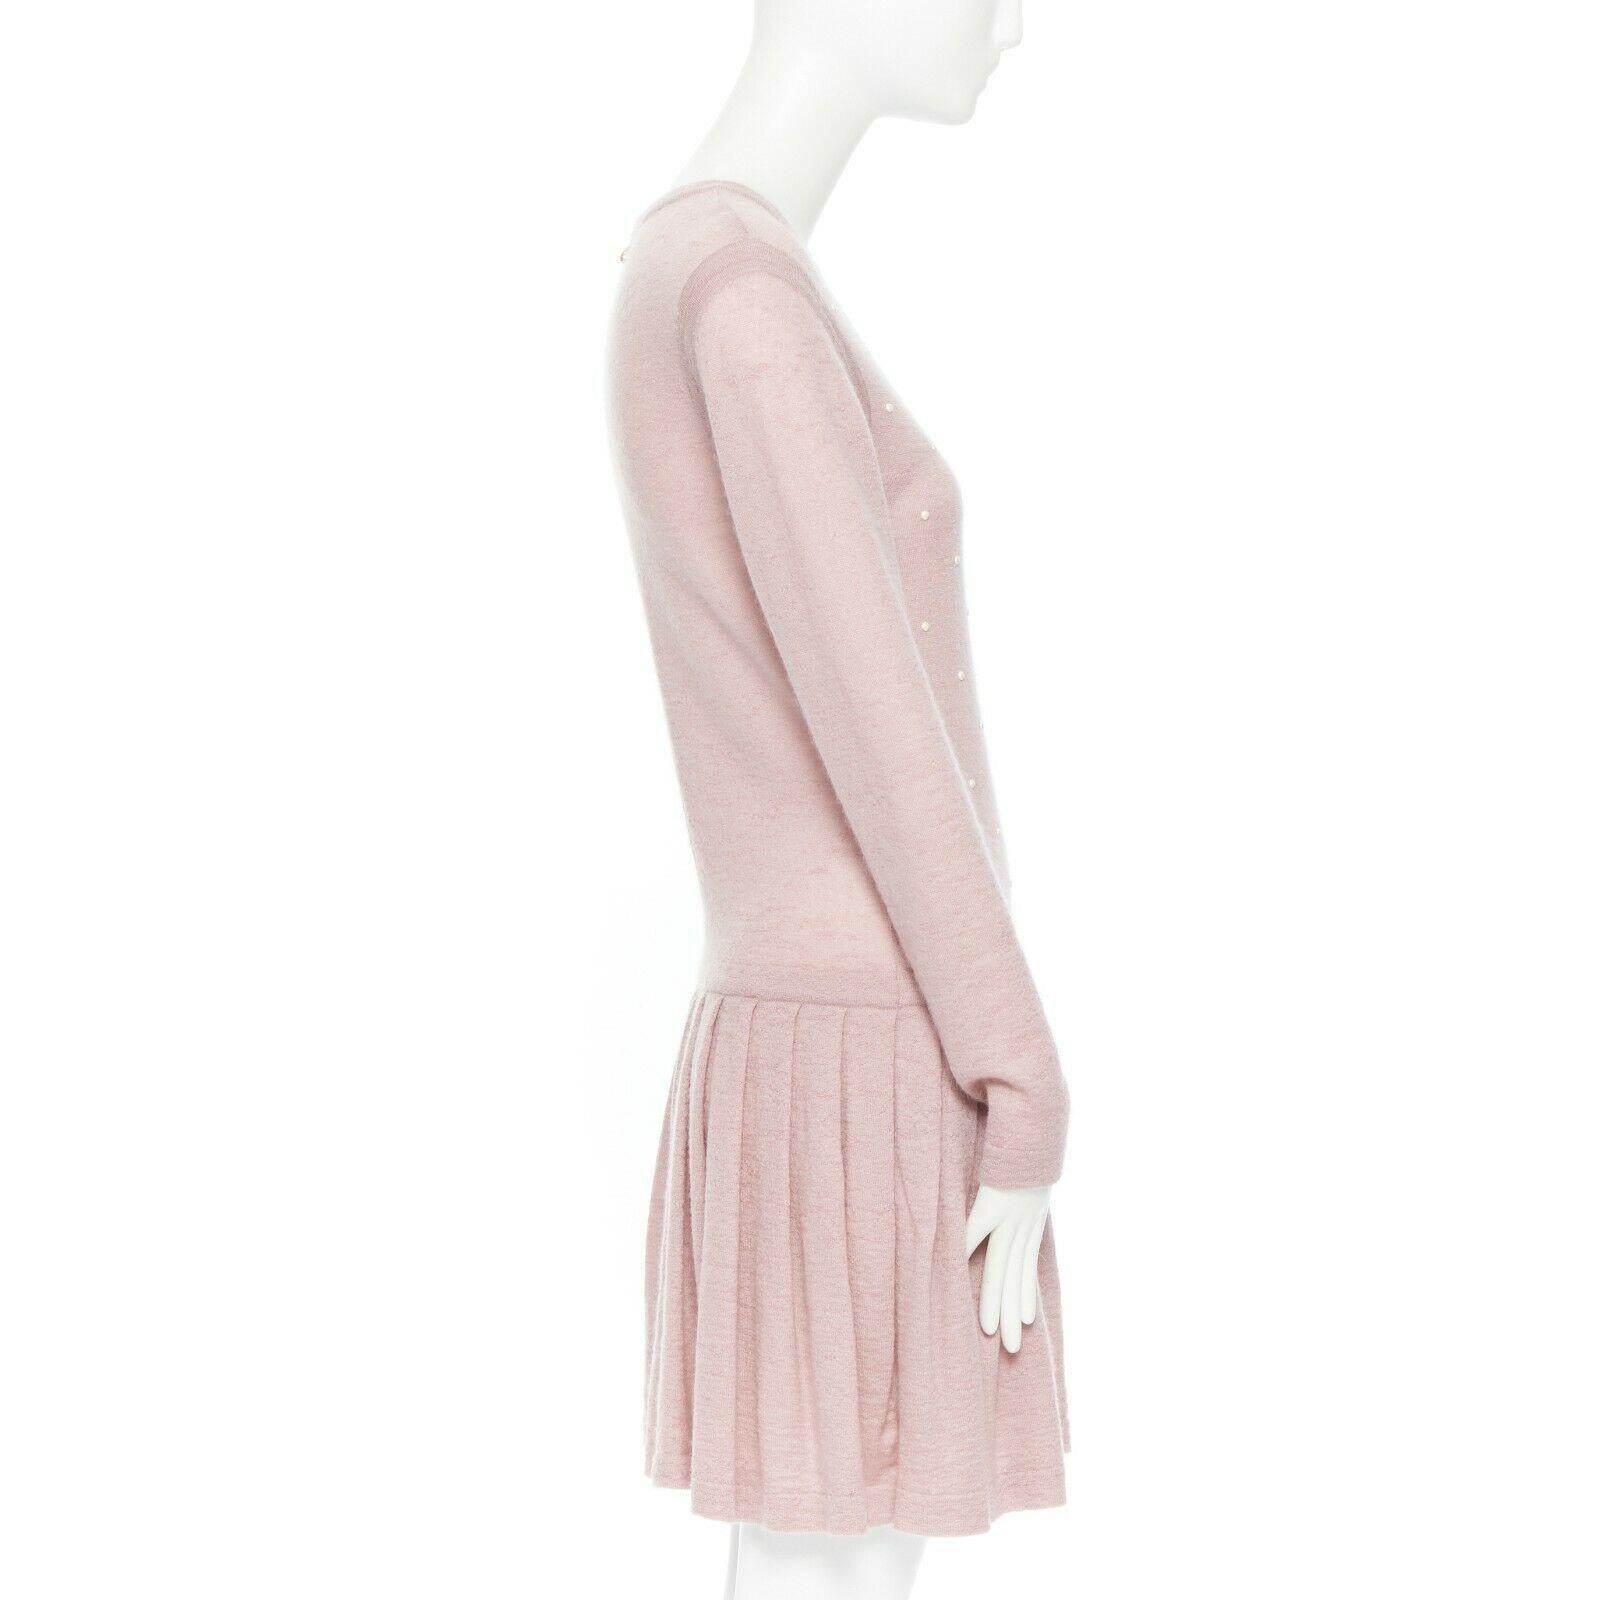 CHANEL pink mohair cashmere pearl embellished skater knitted dress IT40 S

CHANEL BY KARL LAGERFELD
Pure cashmere mohair dress. Ballerina/figure skater style. Exclusive dusty pink color. Pearl and 